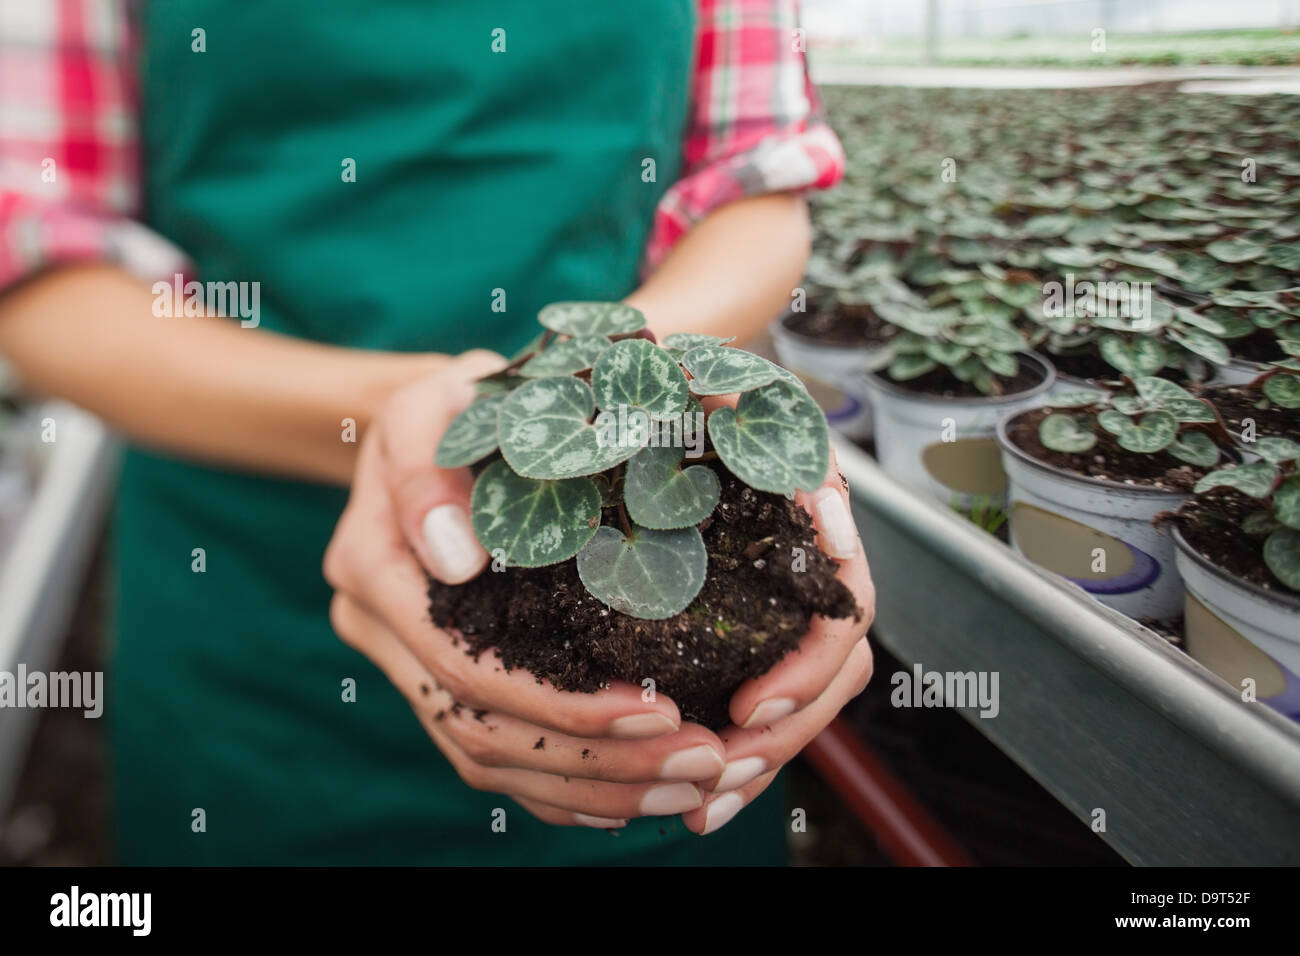 Garden center worker holding plant about to tbe potted Stock Photo